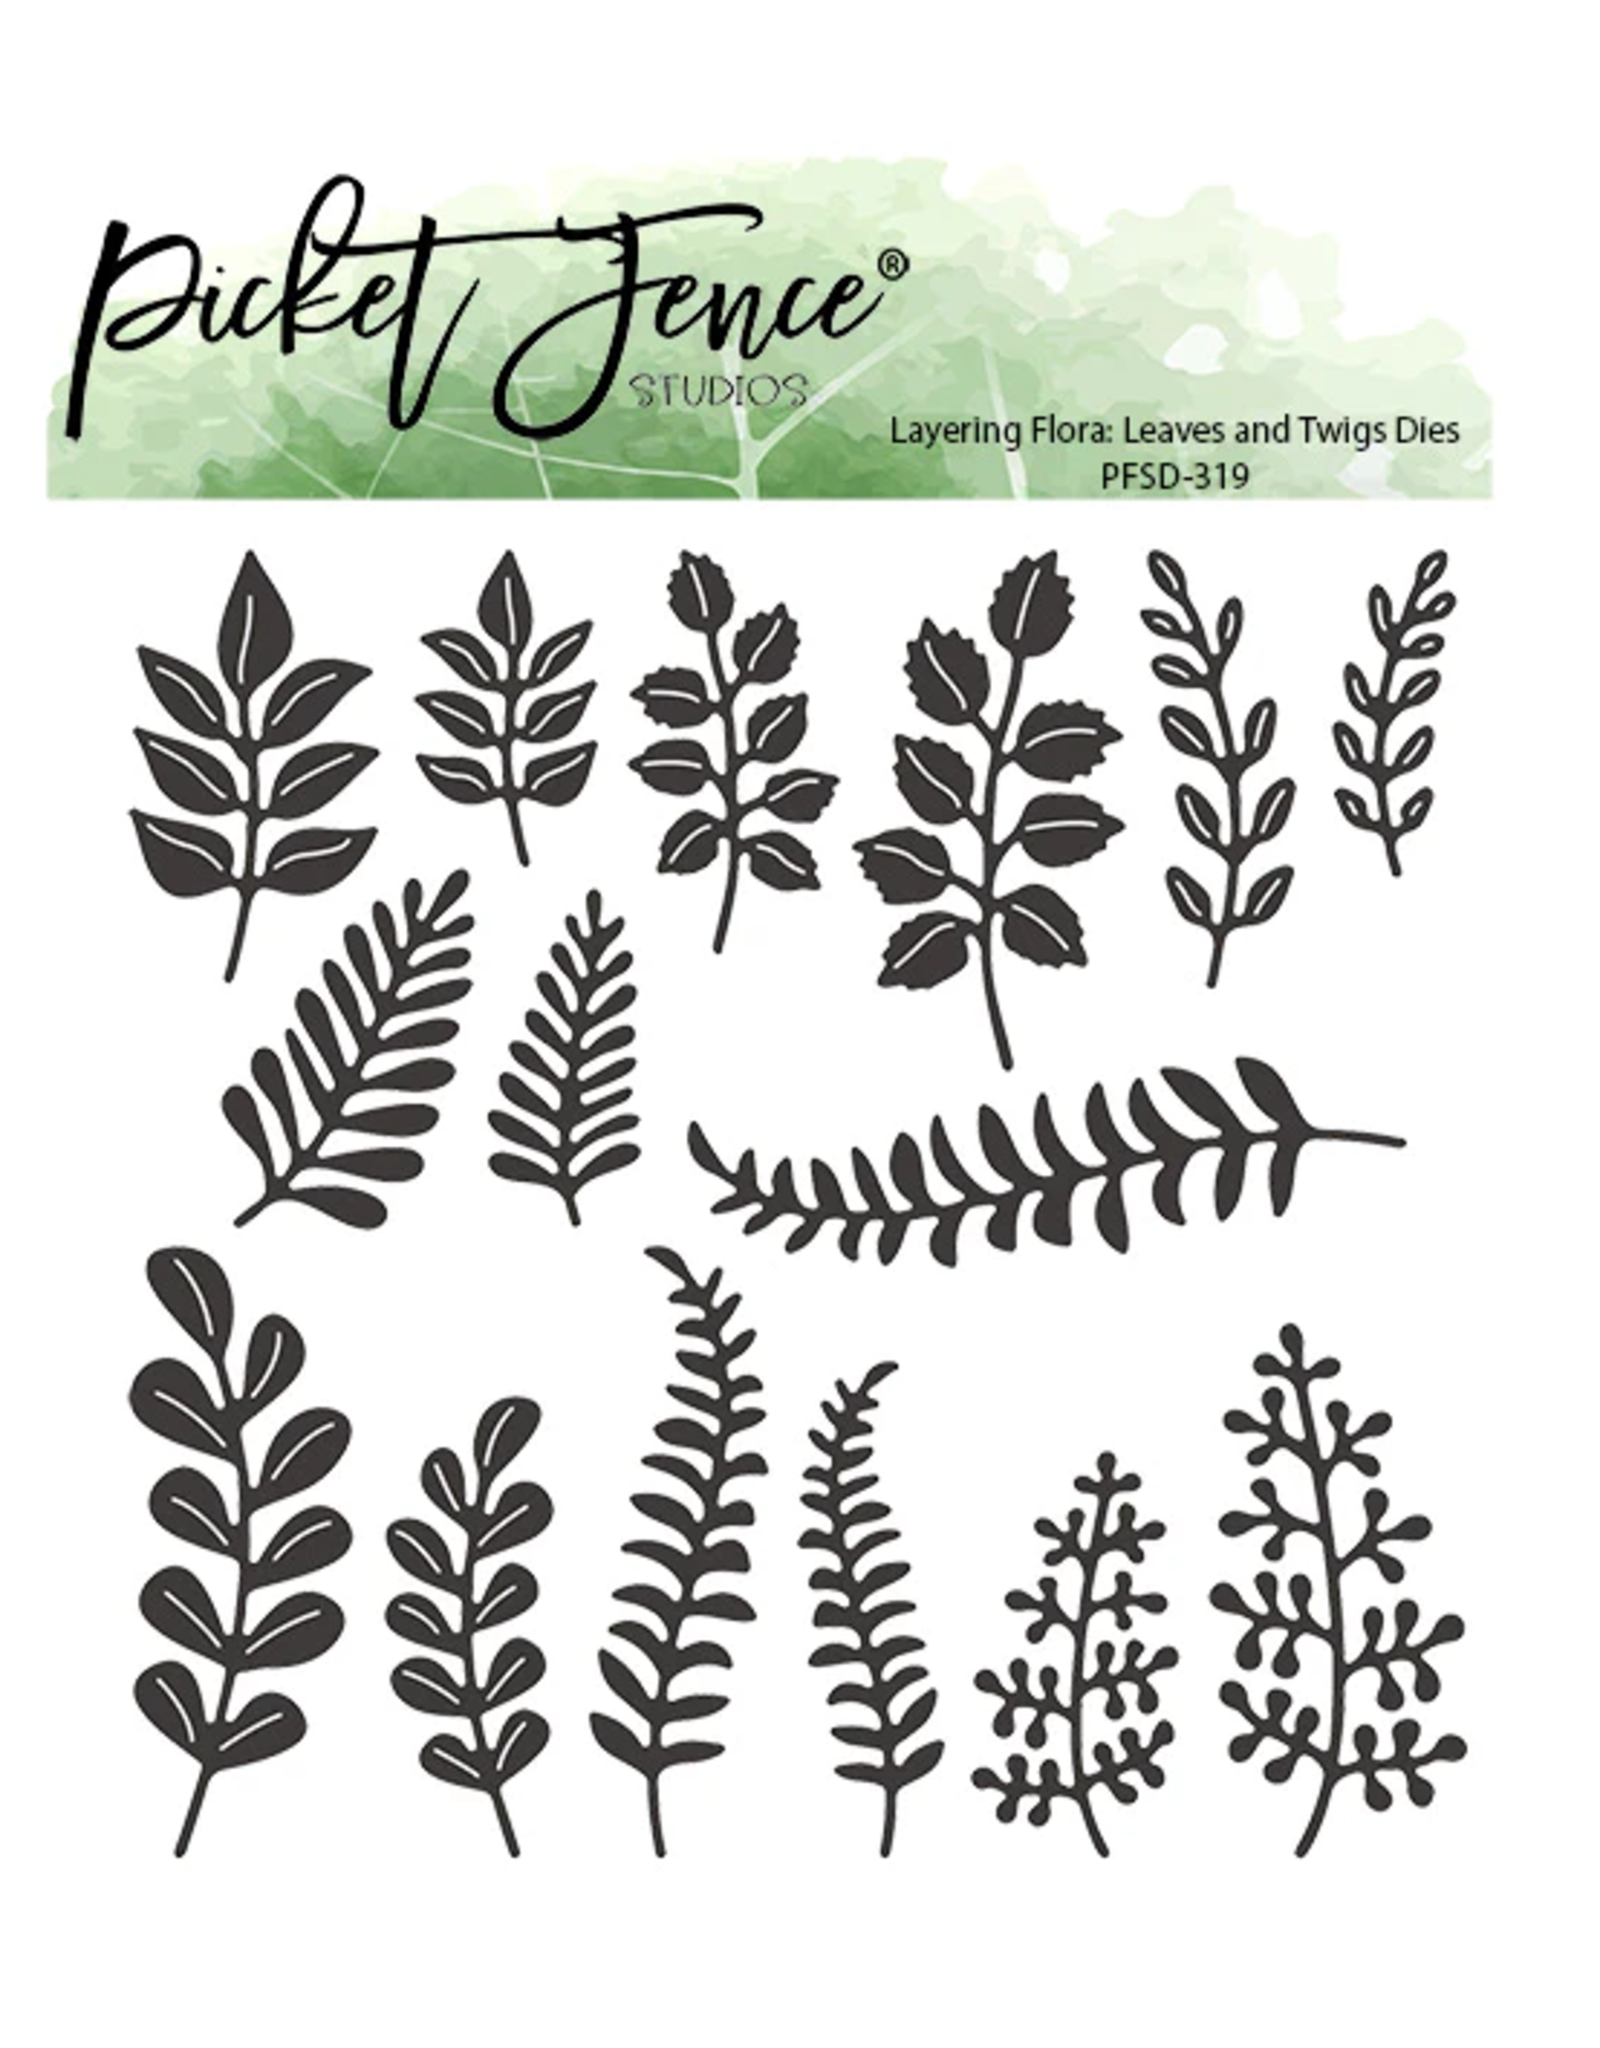 PICKET FENCE PICKET FENCE STUDIOS LAYERING FLORA: LEAVES AND TWIGS DIE SET